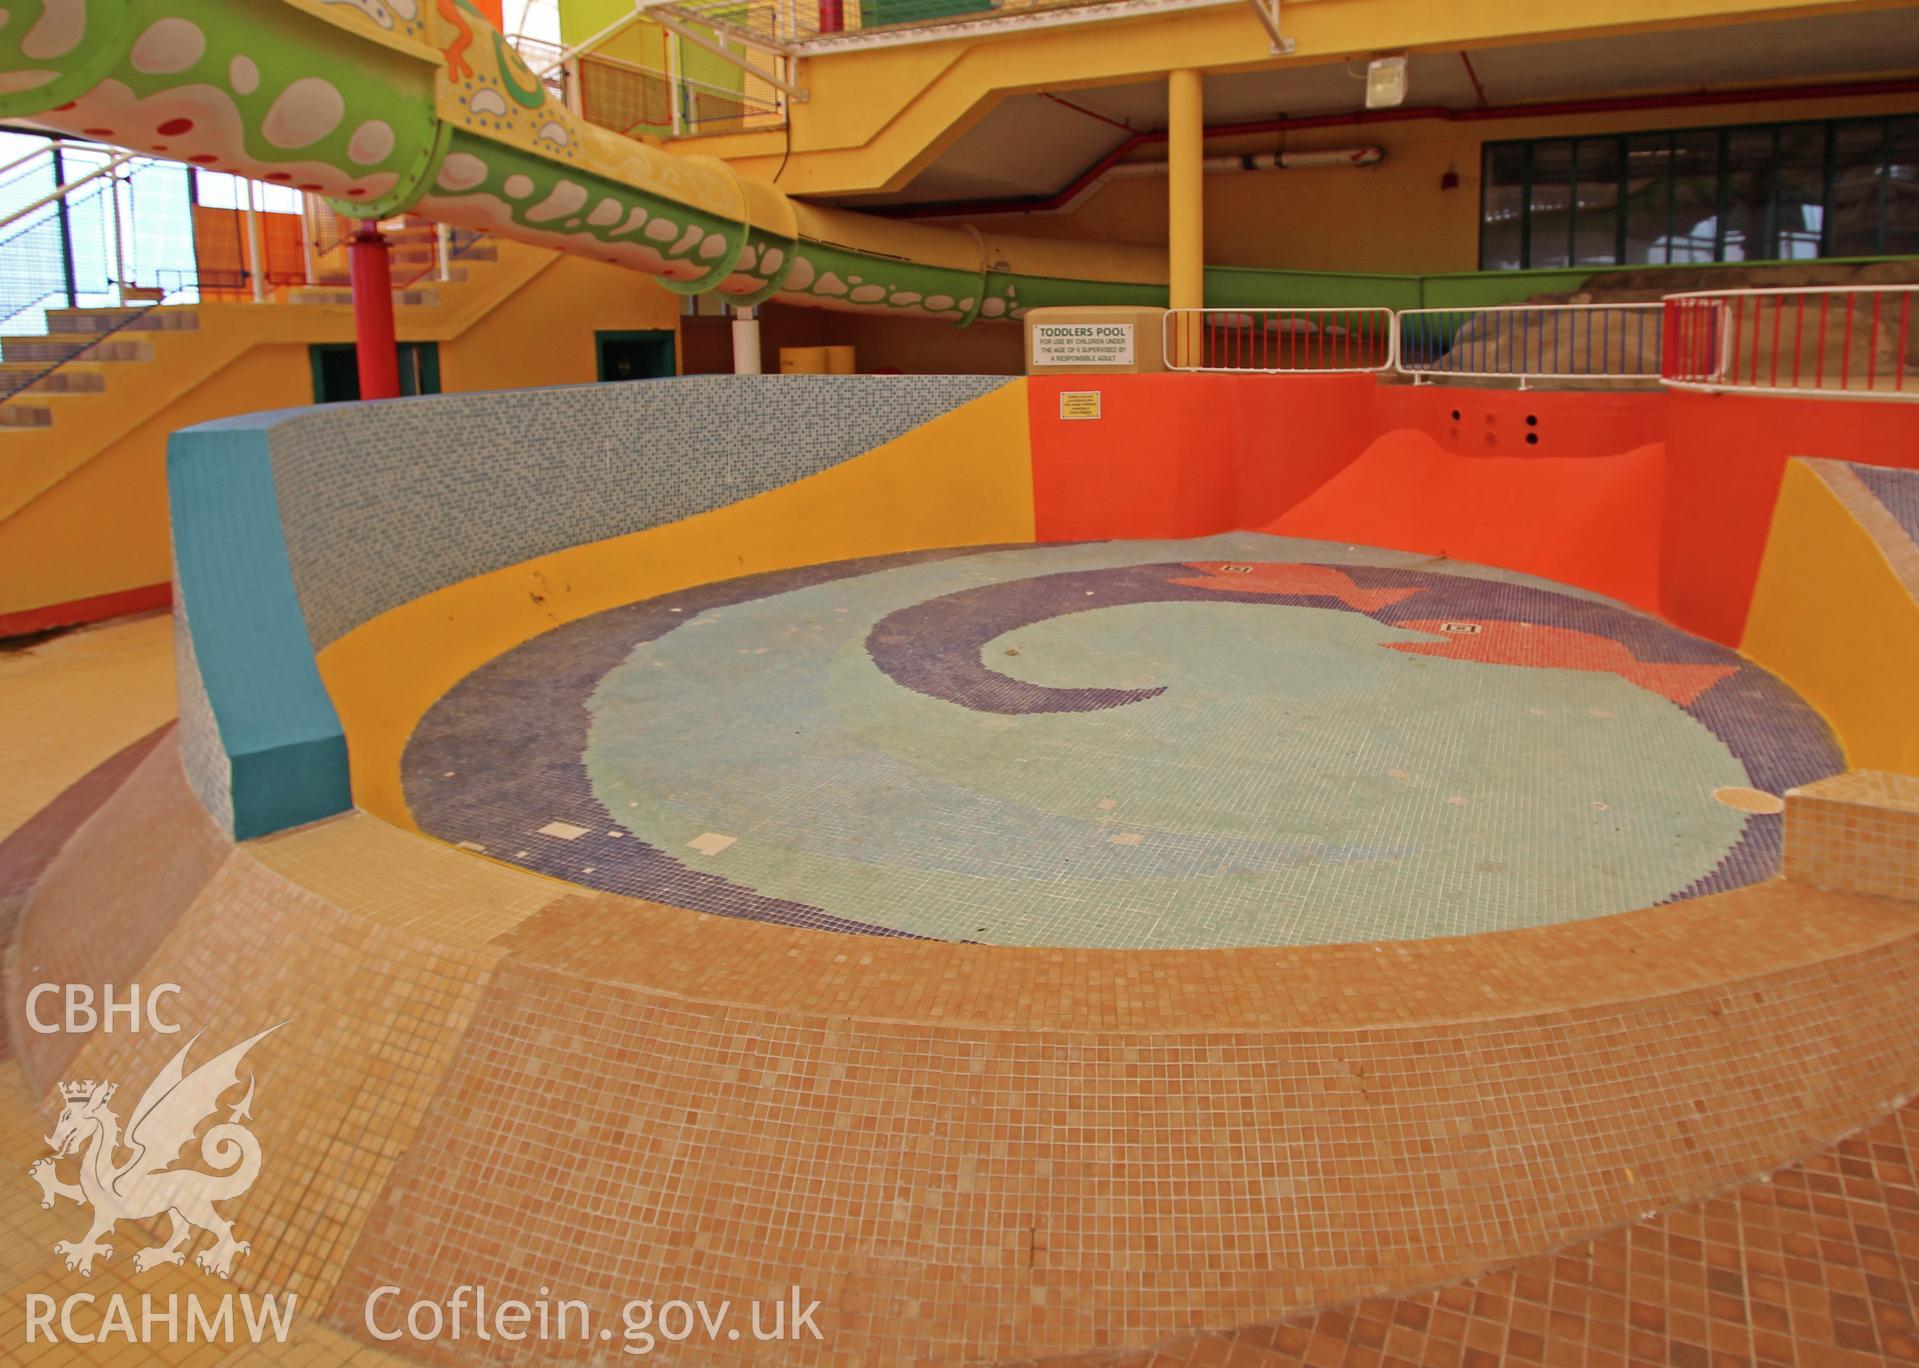 The children's pool at Rhyl Sun Centre, taken by Sue Fielding, 27th May 2016.